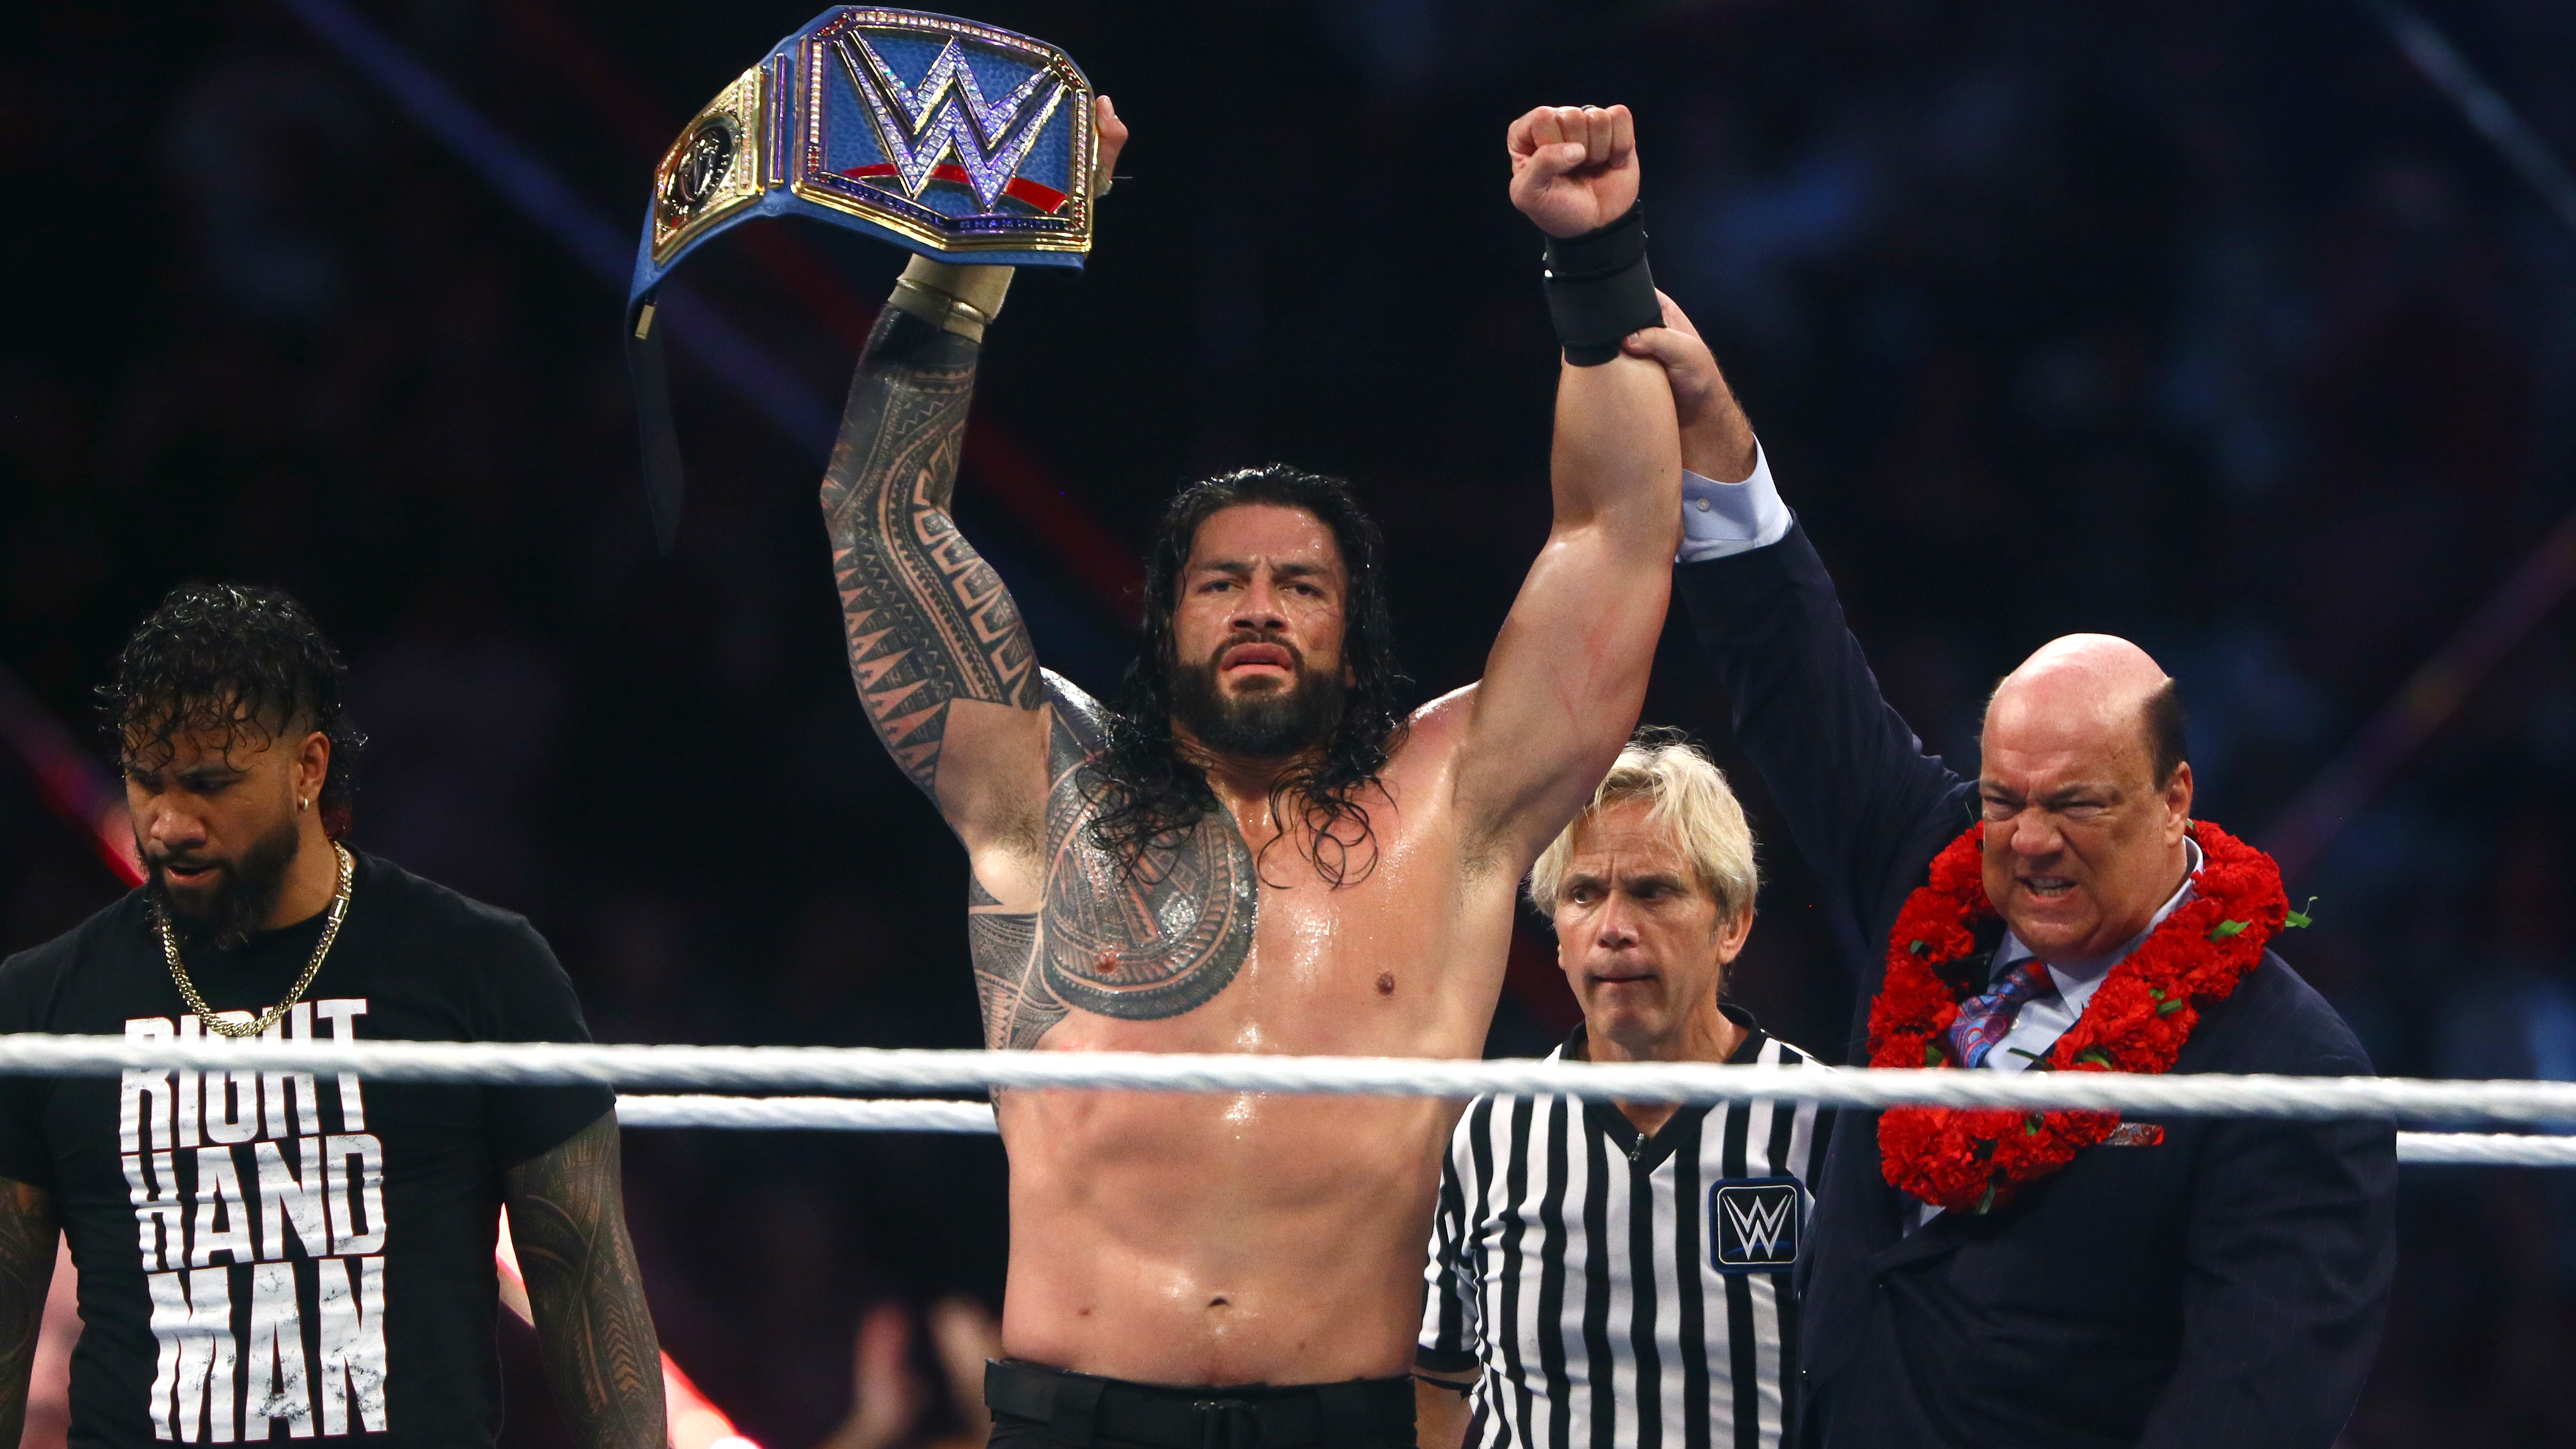 Roman Reigns embraces new heel role at WrestleMania, retains WWE Universal title